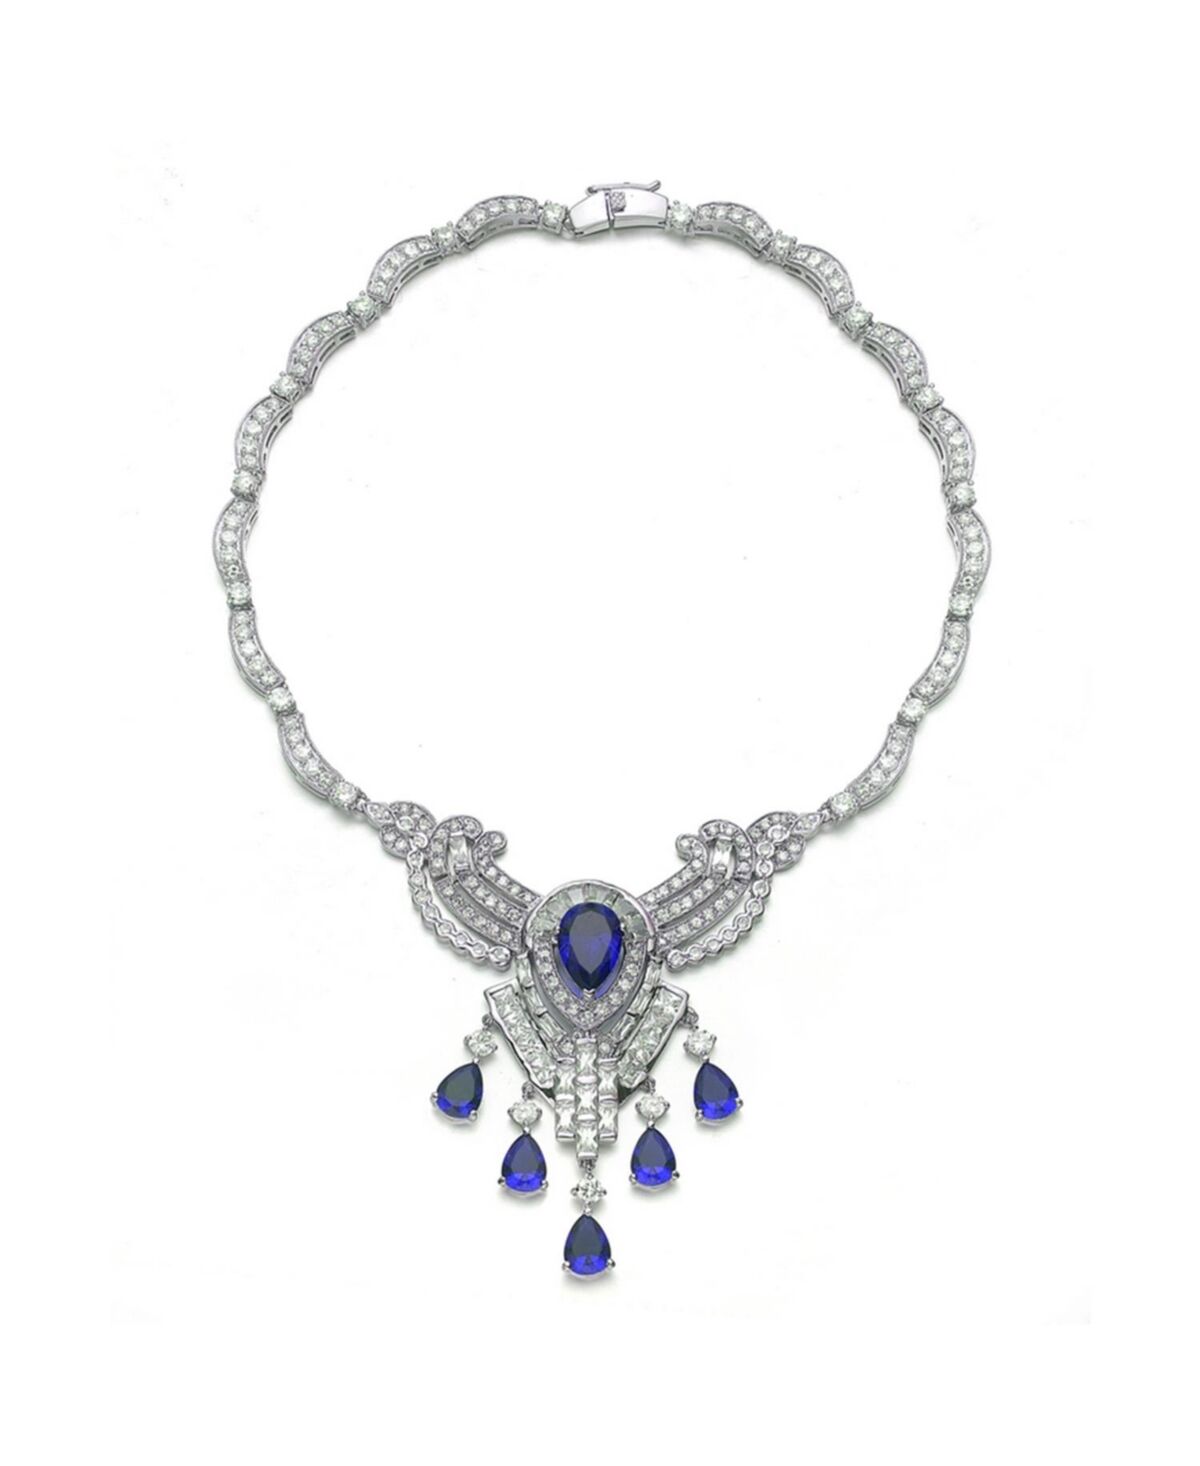 Genevive Elegant Heavy Sterling Silver Teardrop with Cubic Zirconia Accent Necklace - Sapphire